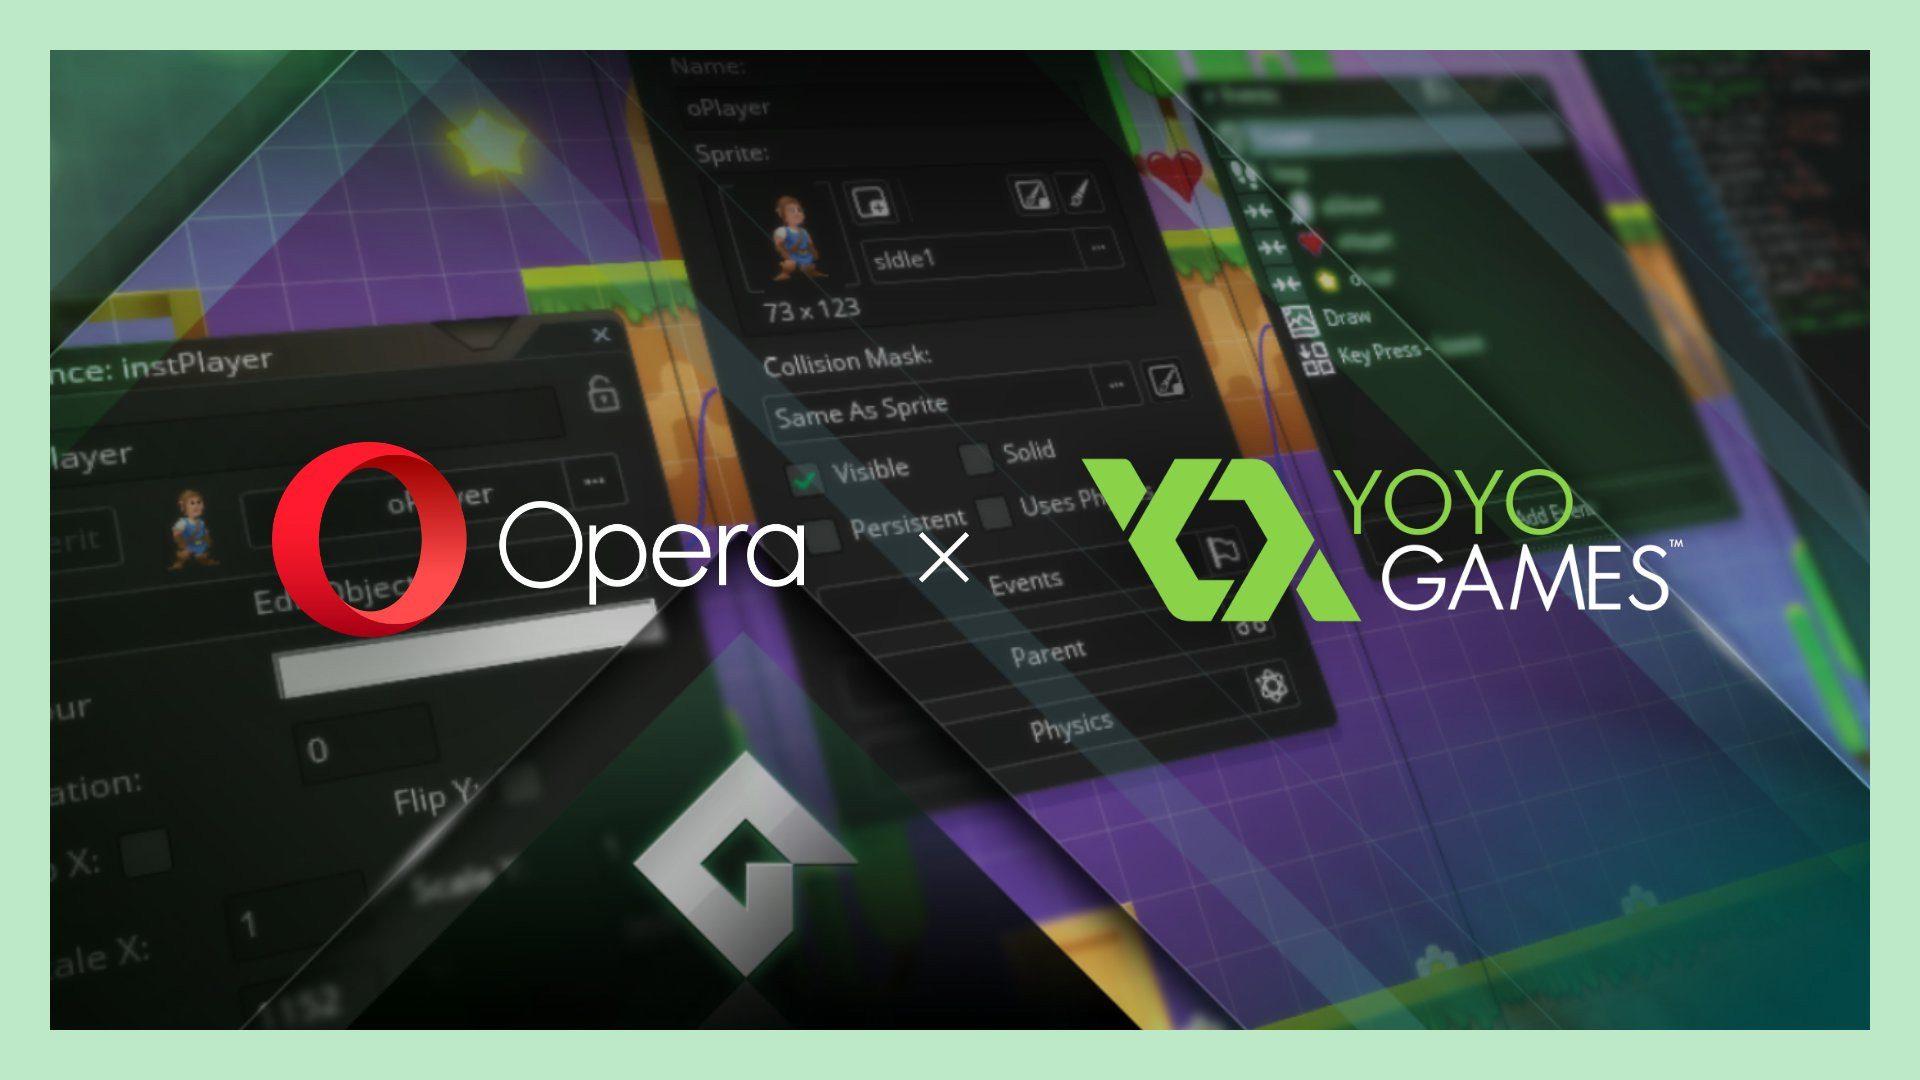 GameMaker on X: It's time to vote for the winner of the @operagxofficial  Mobile Game Jam!! Take a look at the top 5 games and vote on your pick to  become the 